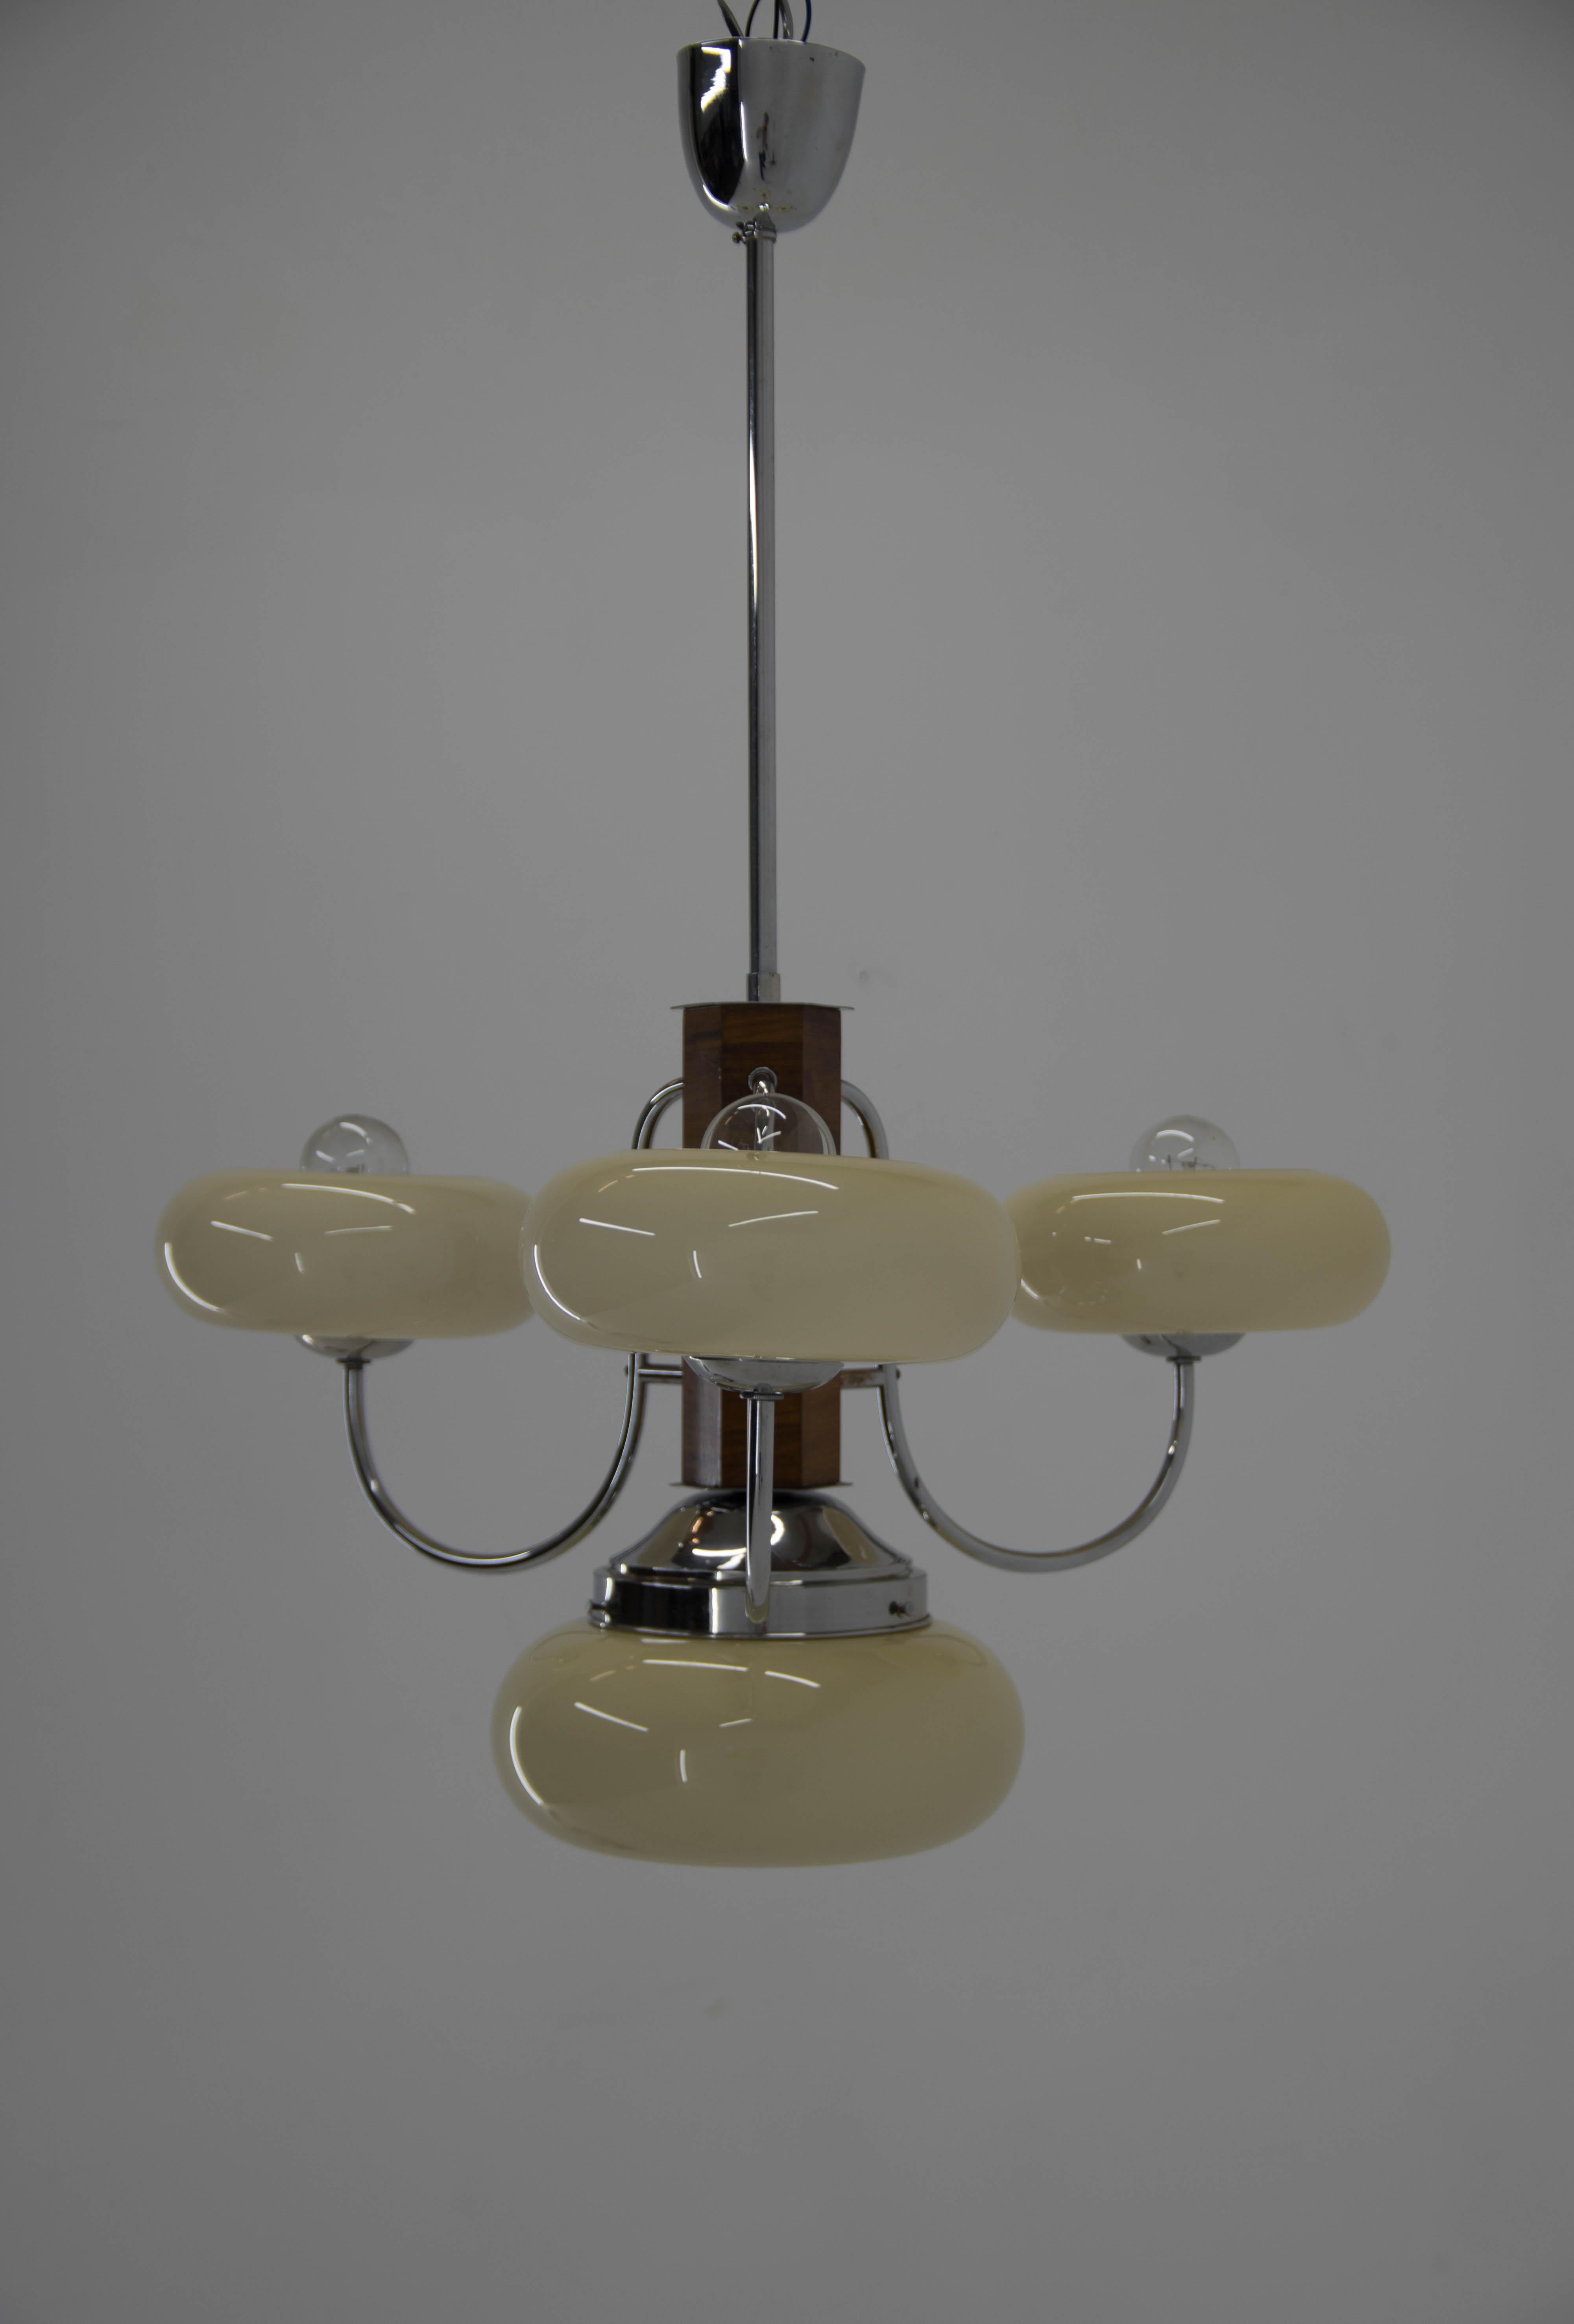 Art Deco Chandelier in Perfect Condition, 1930s 5